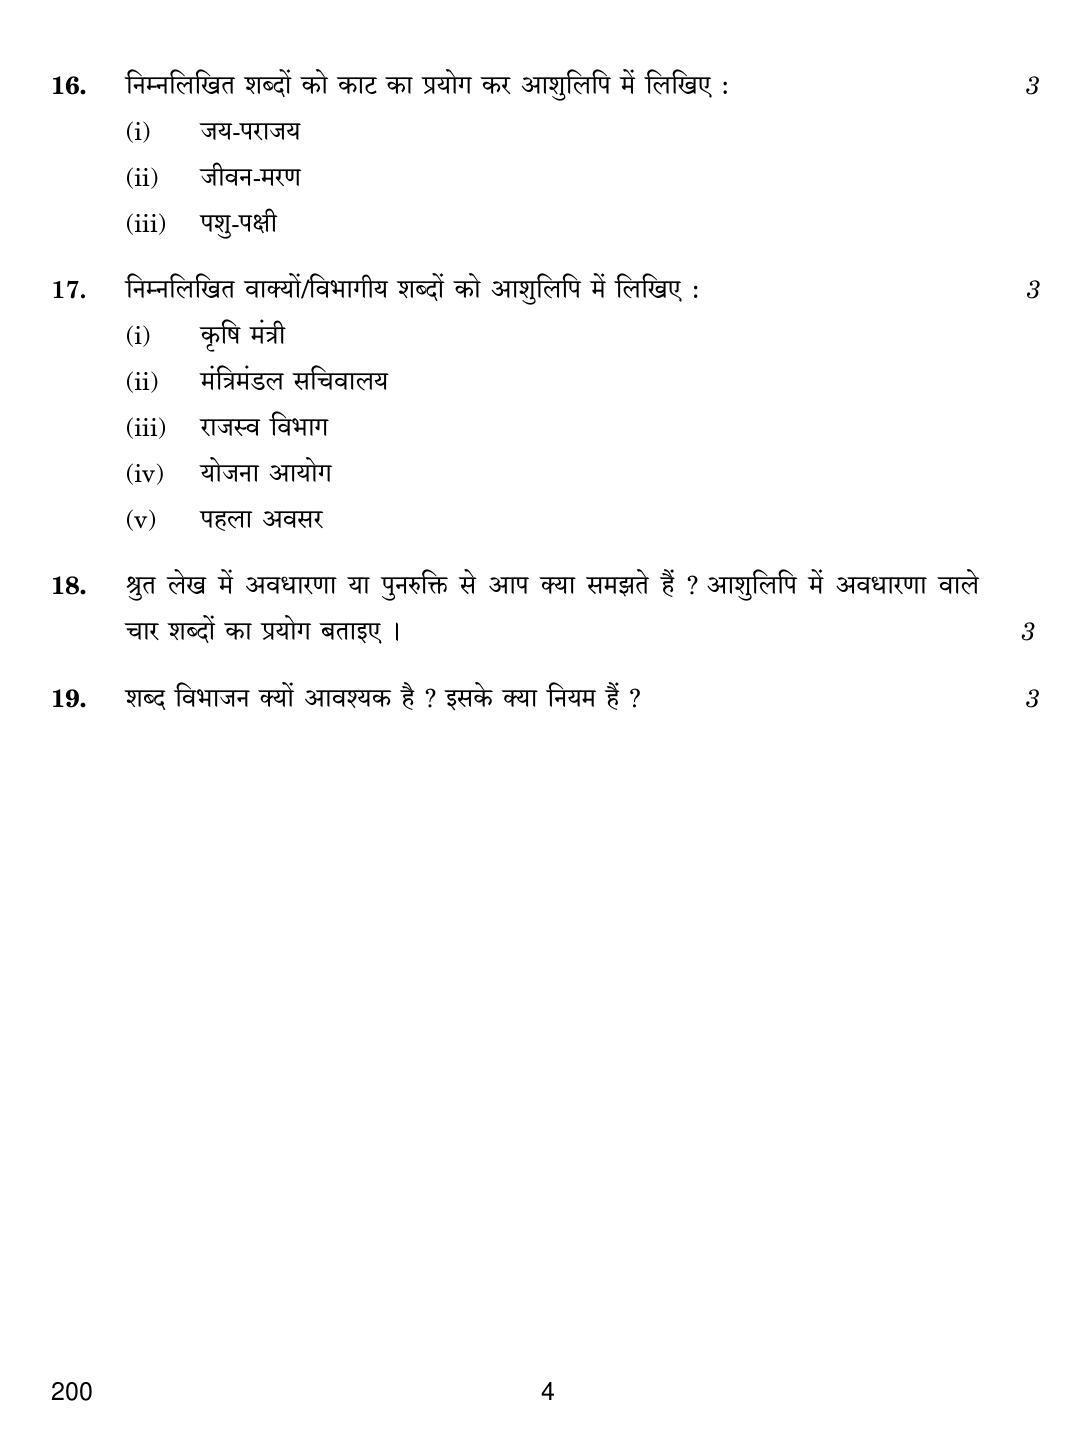 CBSE Class 12 200 SHORTHAND HINDI 2019 Compartment Question Paper - Page 4